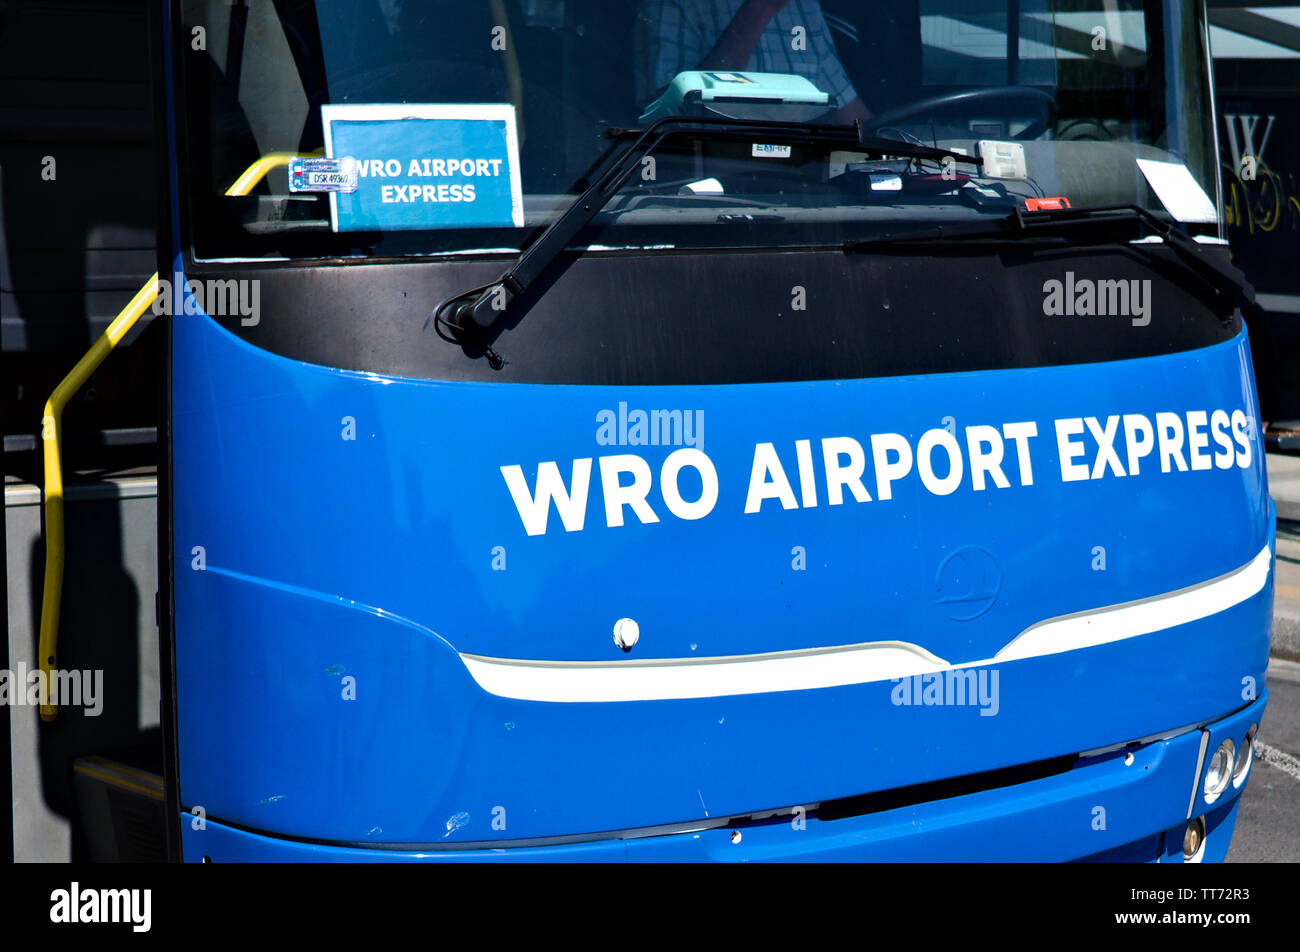 Wroclaw Airport Shuttle Bus - wro Airport Express Stockfoto